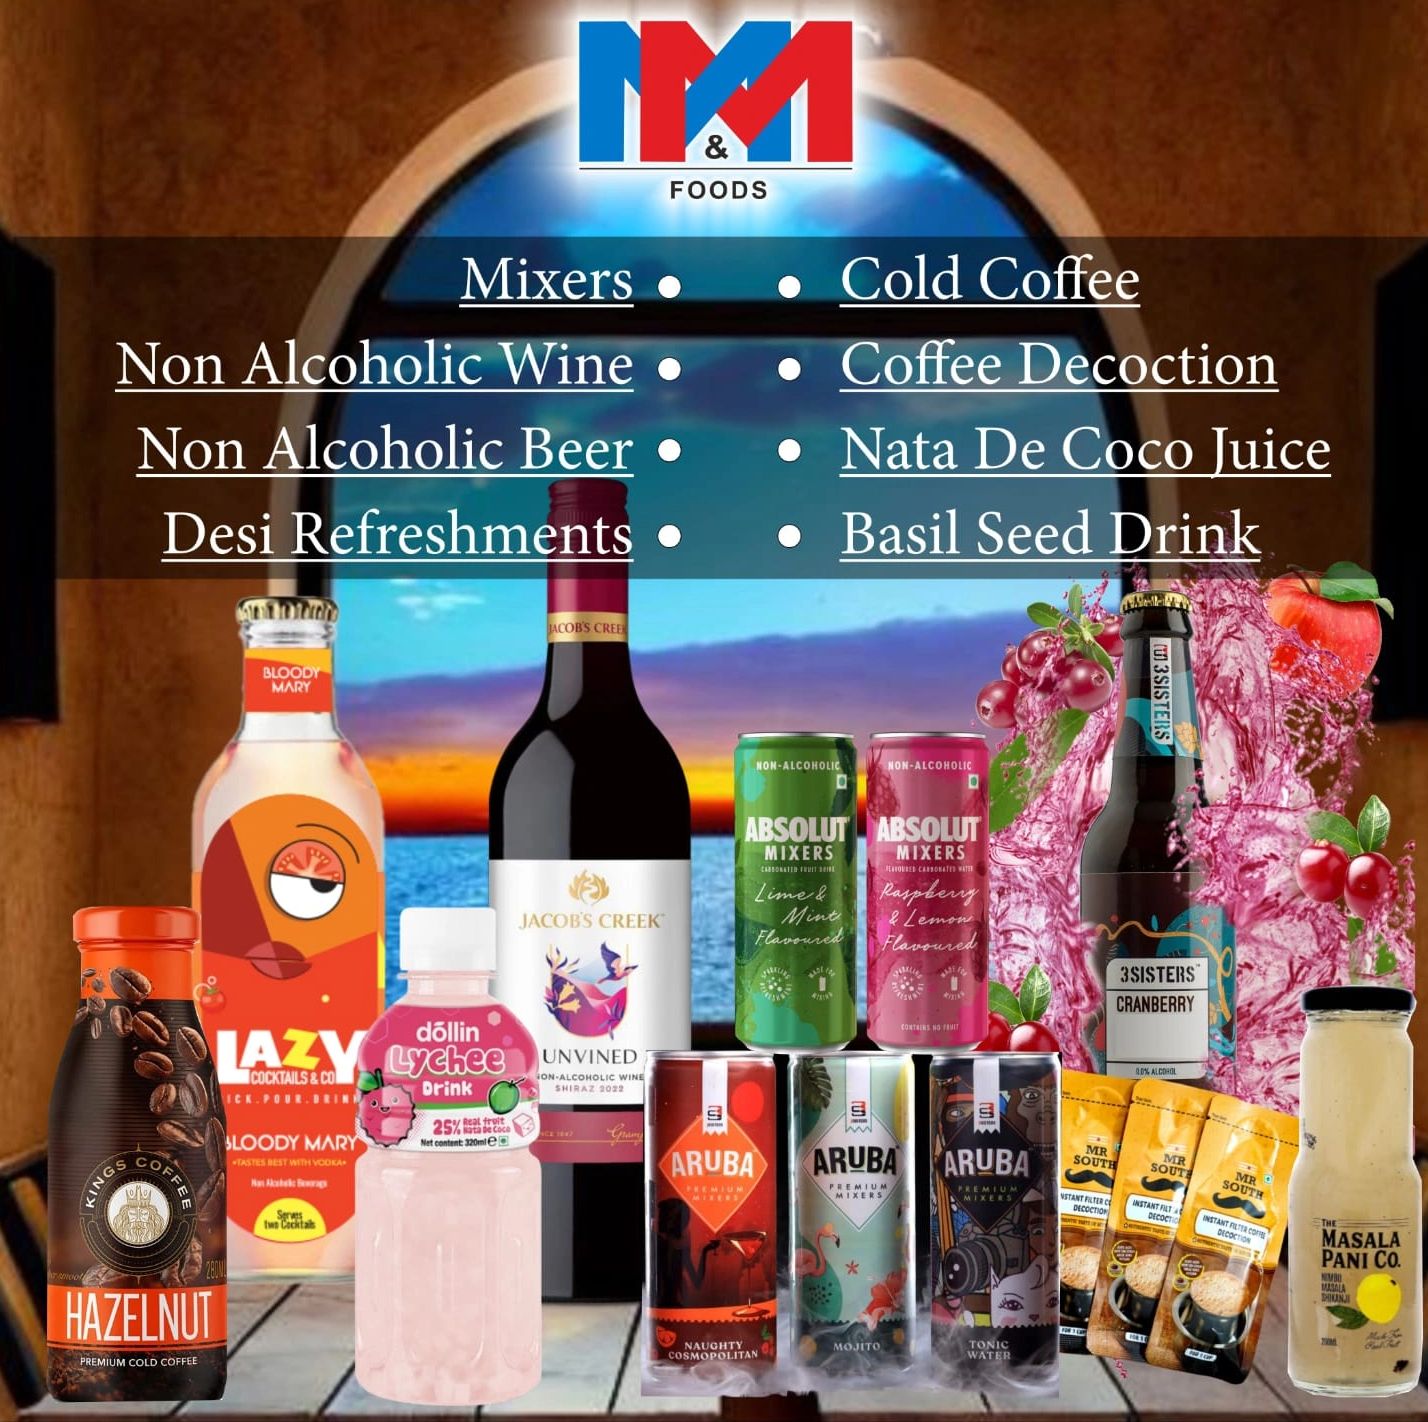 Beverages like cold coffee, cocktail mixers, nata de coco juice, non alcoholic wine and beer